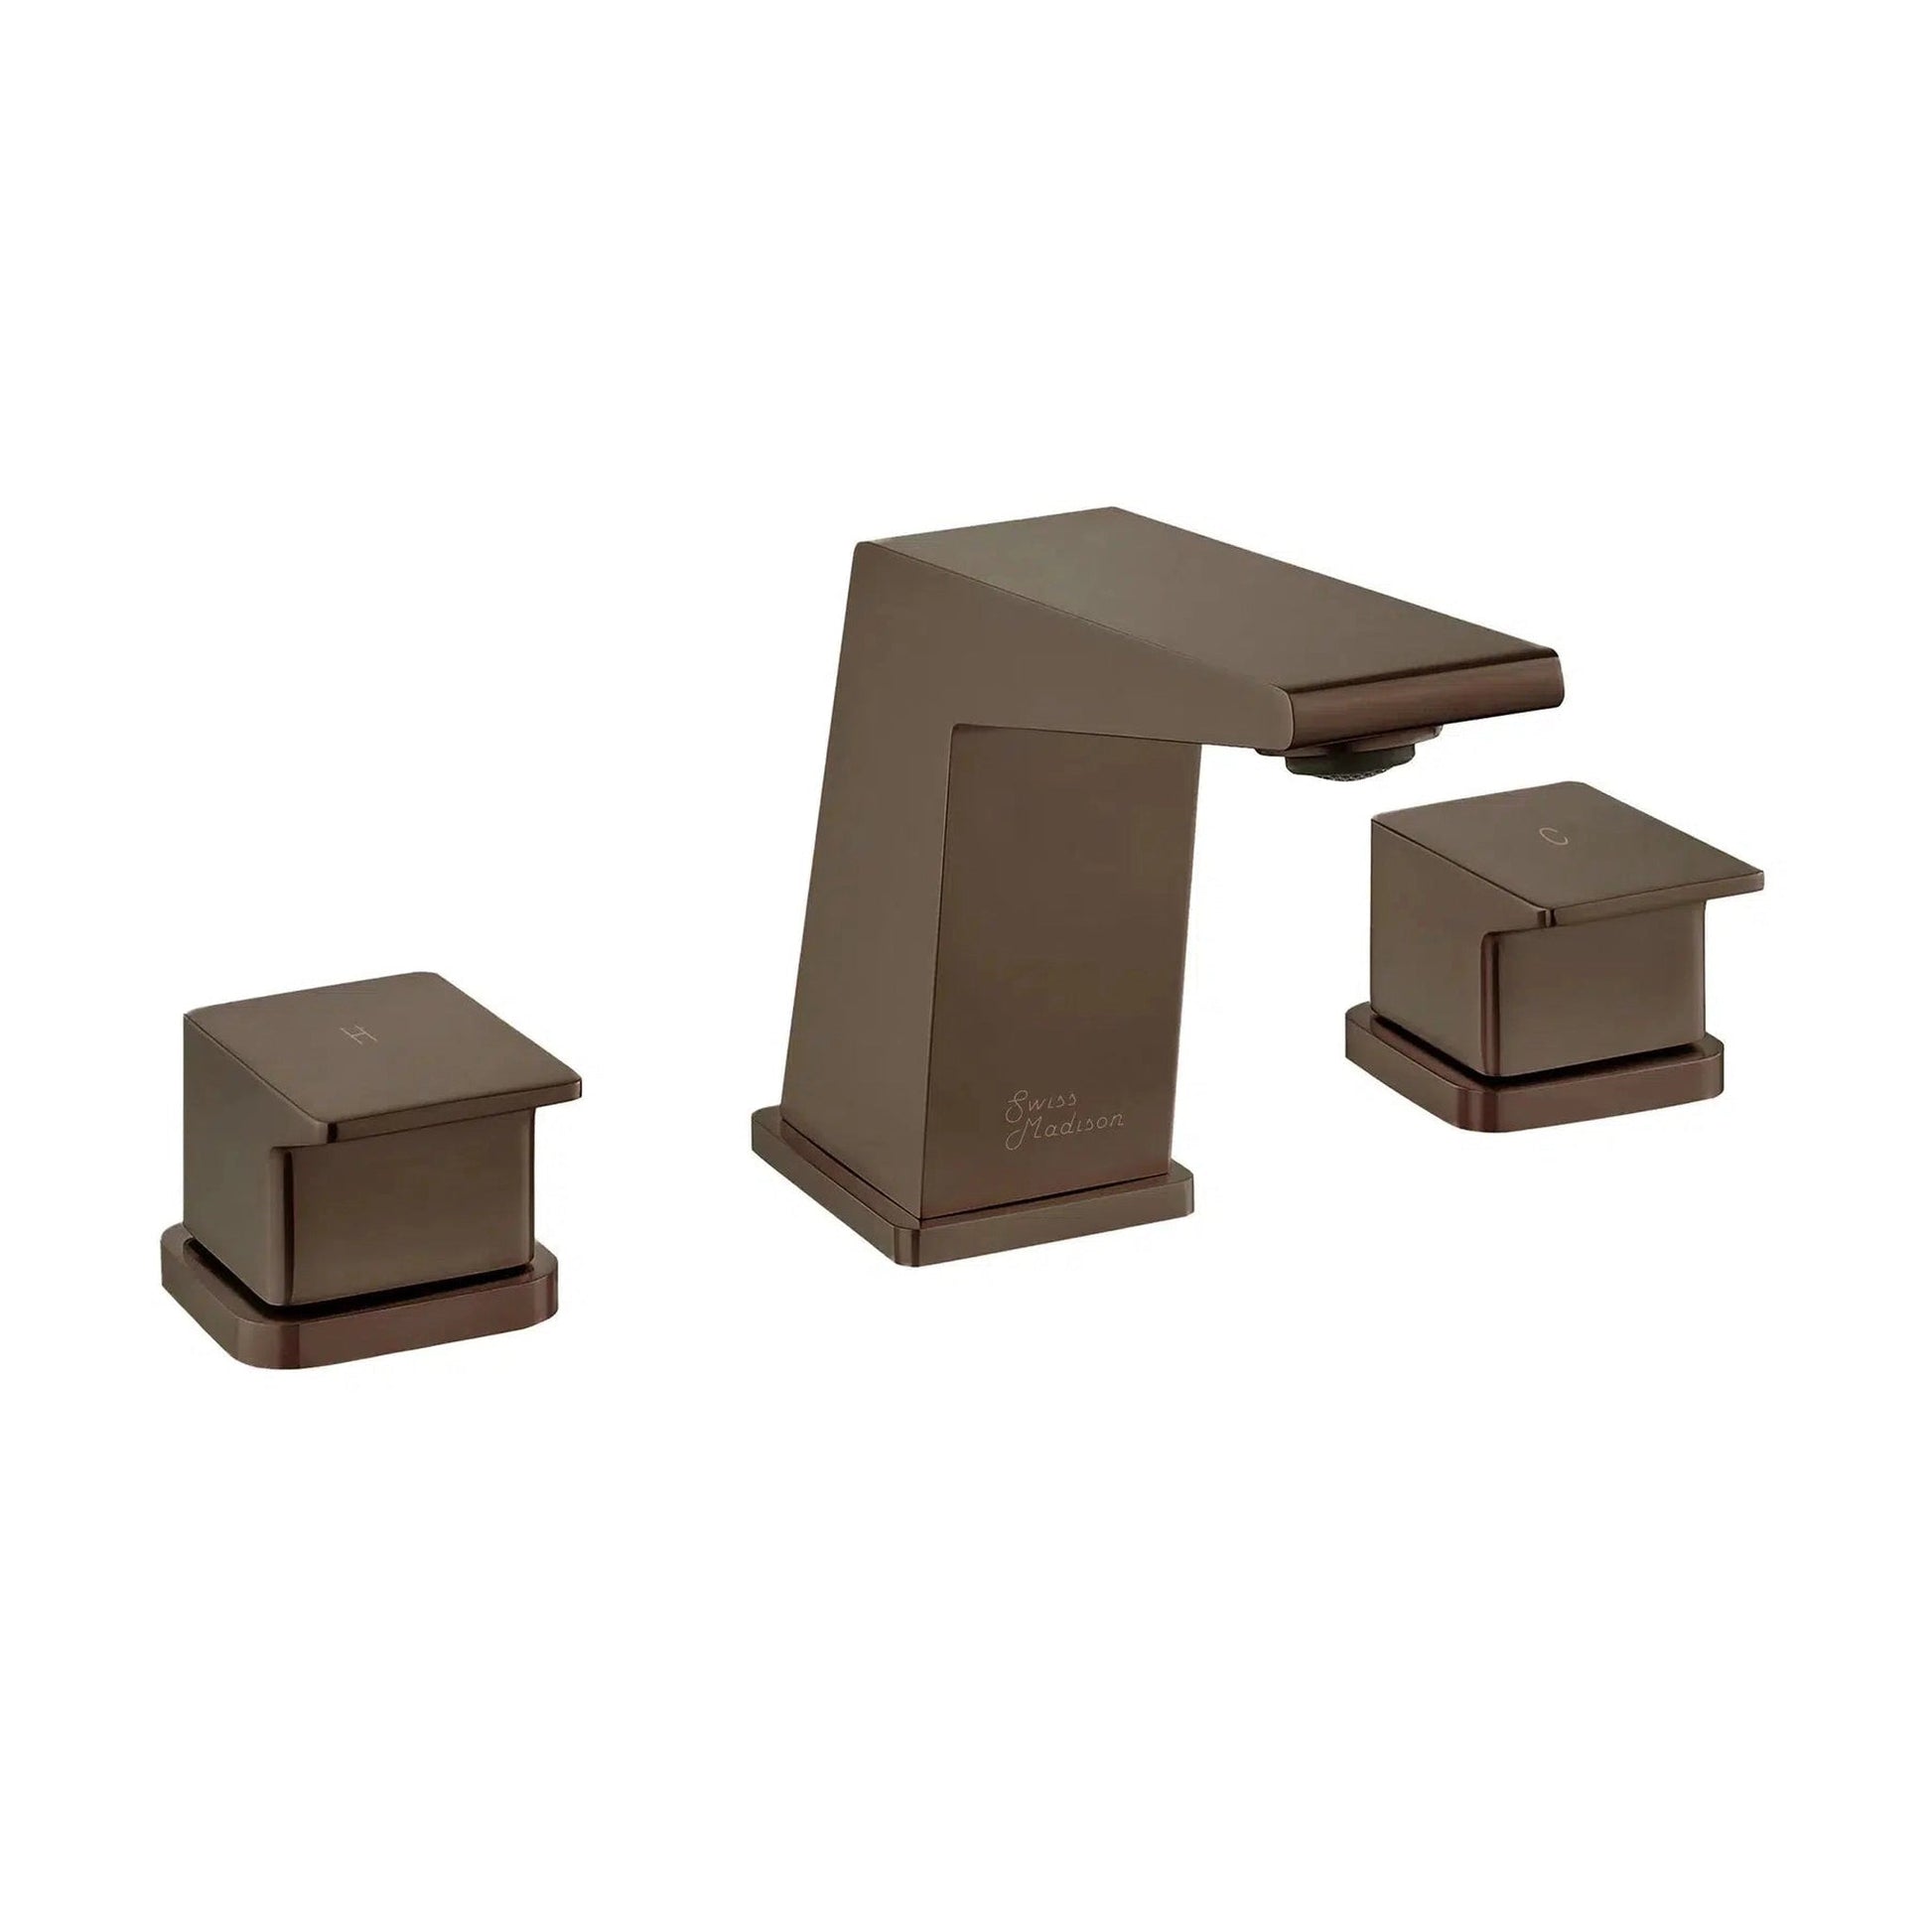 Swiss Madison Carré 8" Oil Rubbed Bronze Widespread Bathroom Faucet With Knob Handles and 1.2 GPM Flow Rate